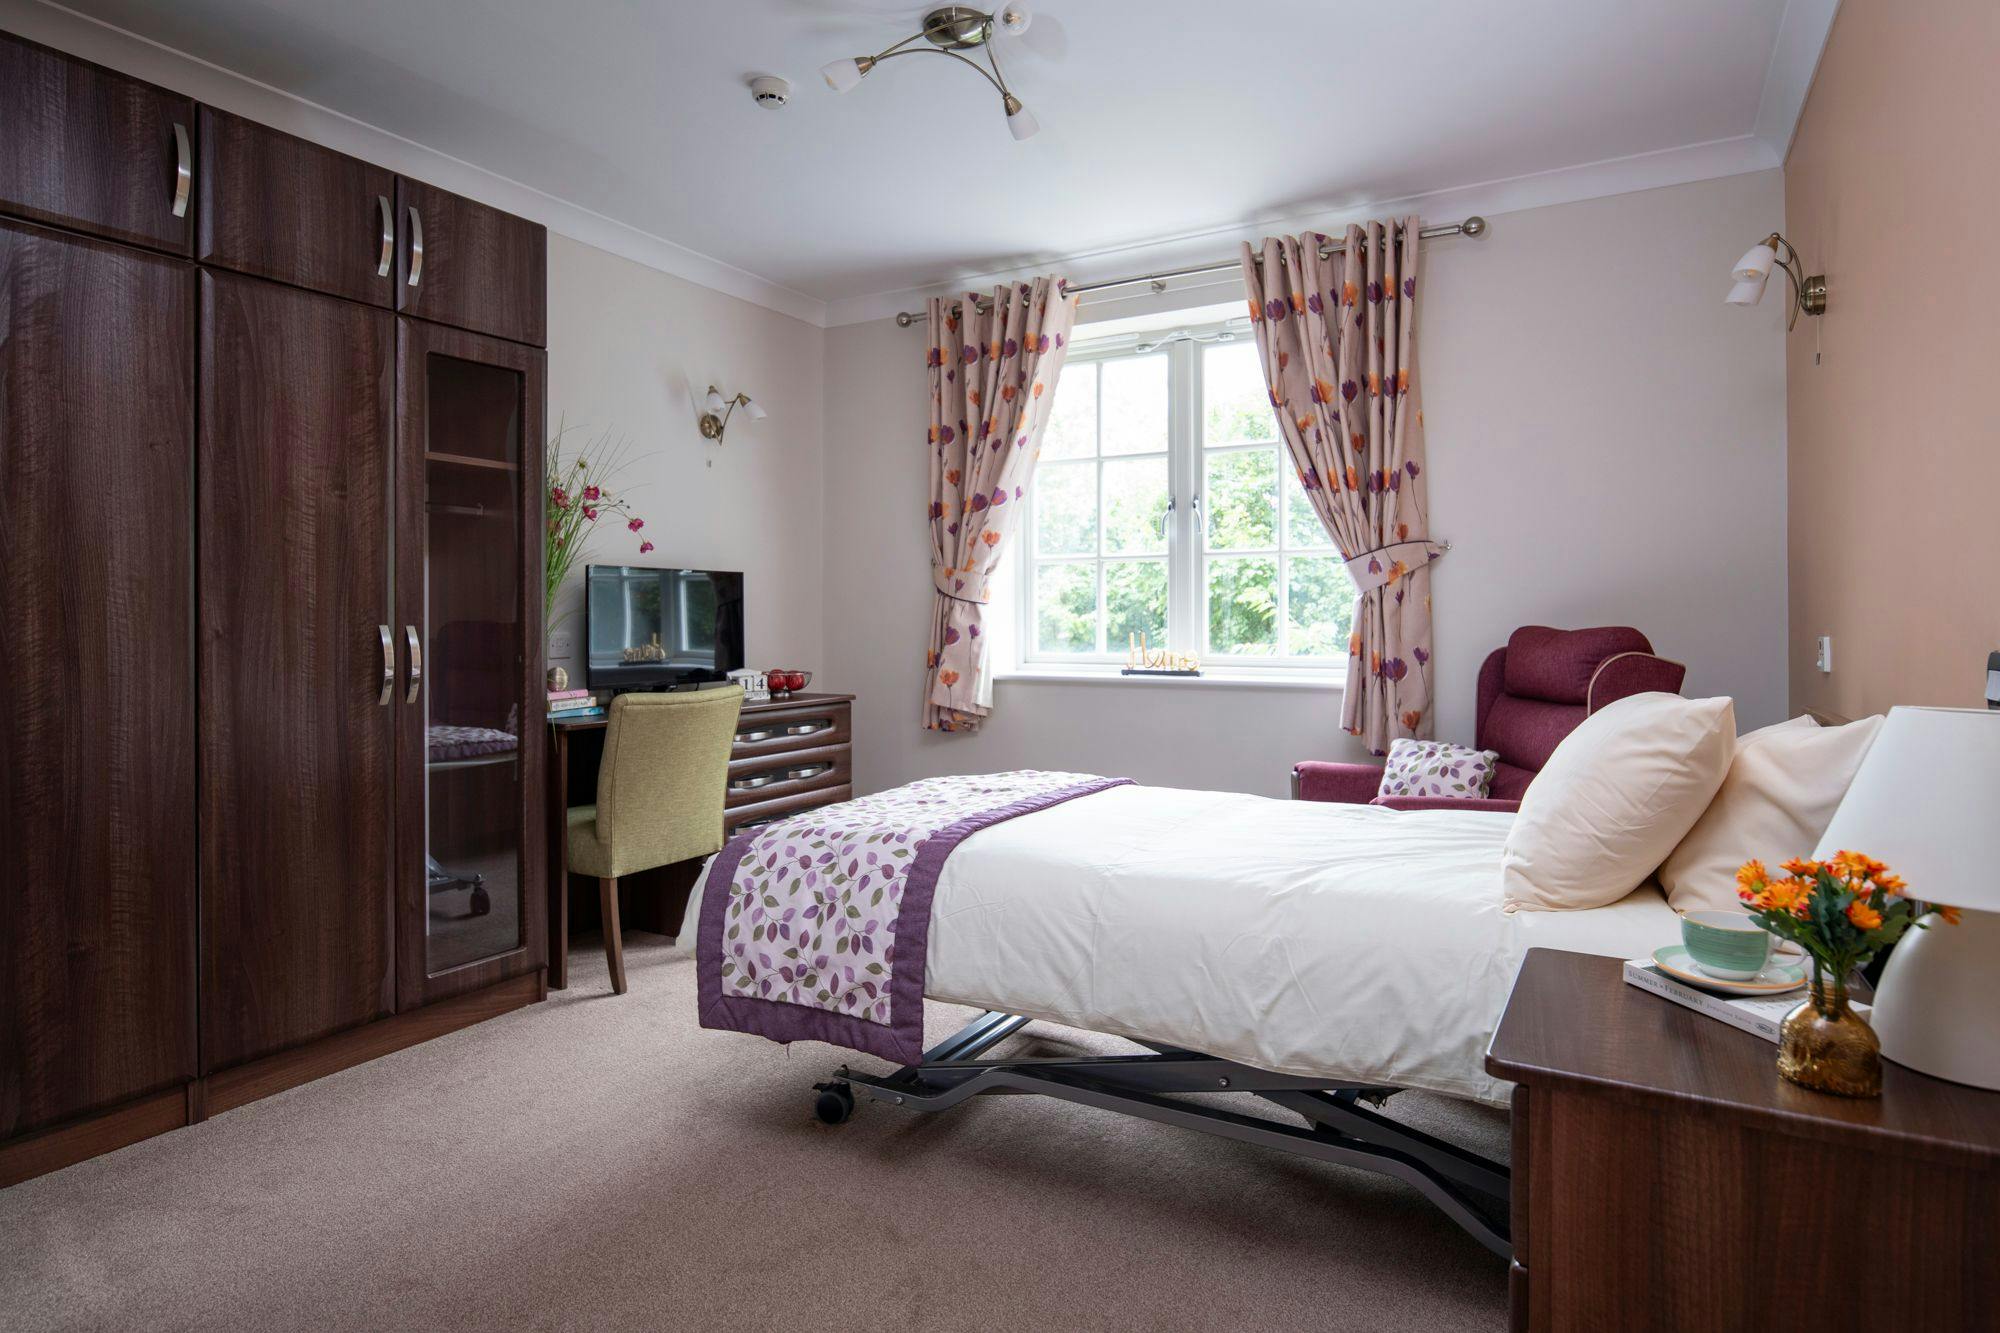 Bedroom at Edwardstow Court Care Home in Stow-on-the-Wold, Cotswold